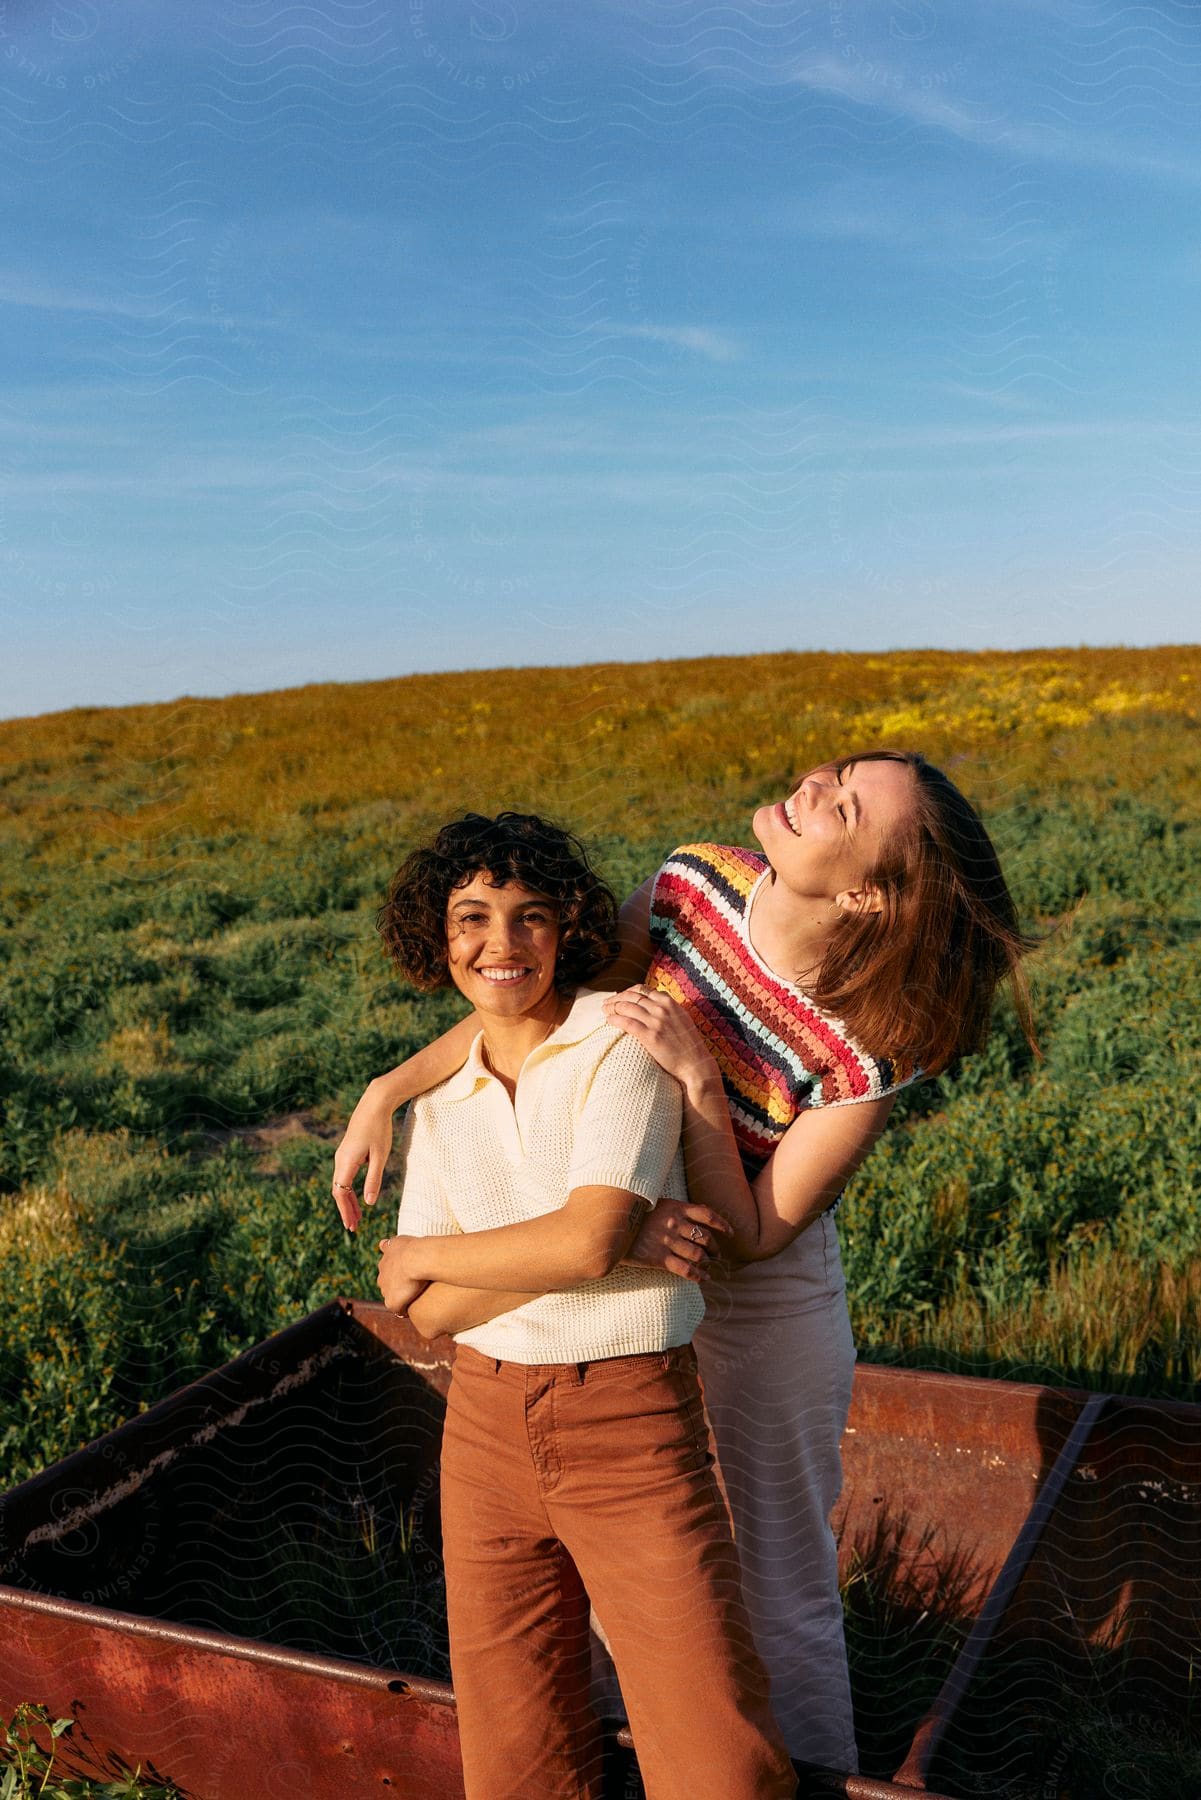 Two young teenagers stand in an area covered with short grass, sharing laughter